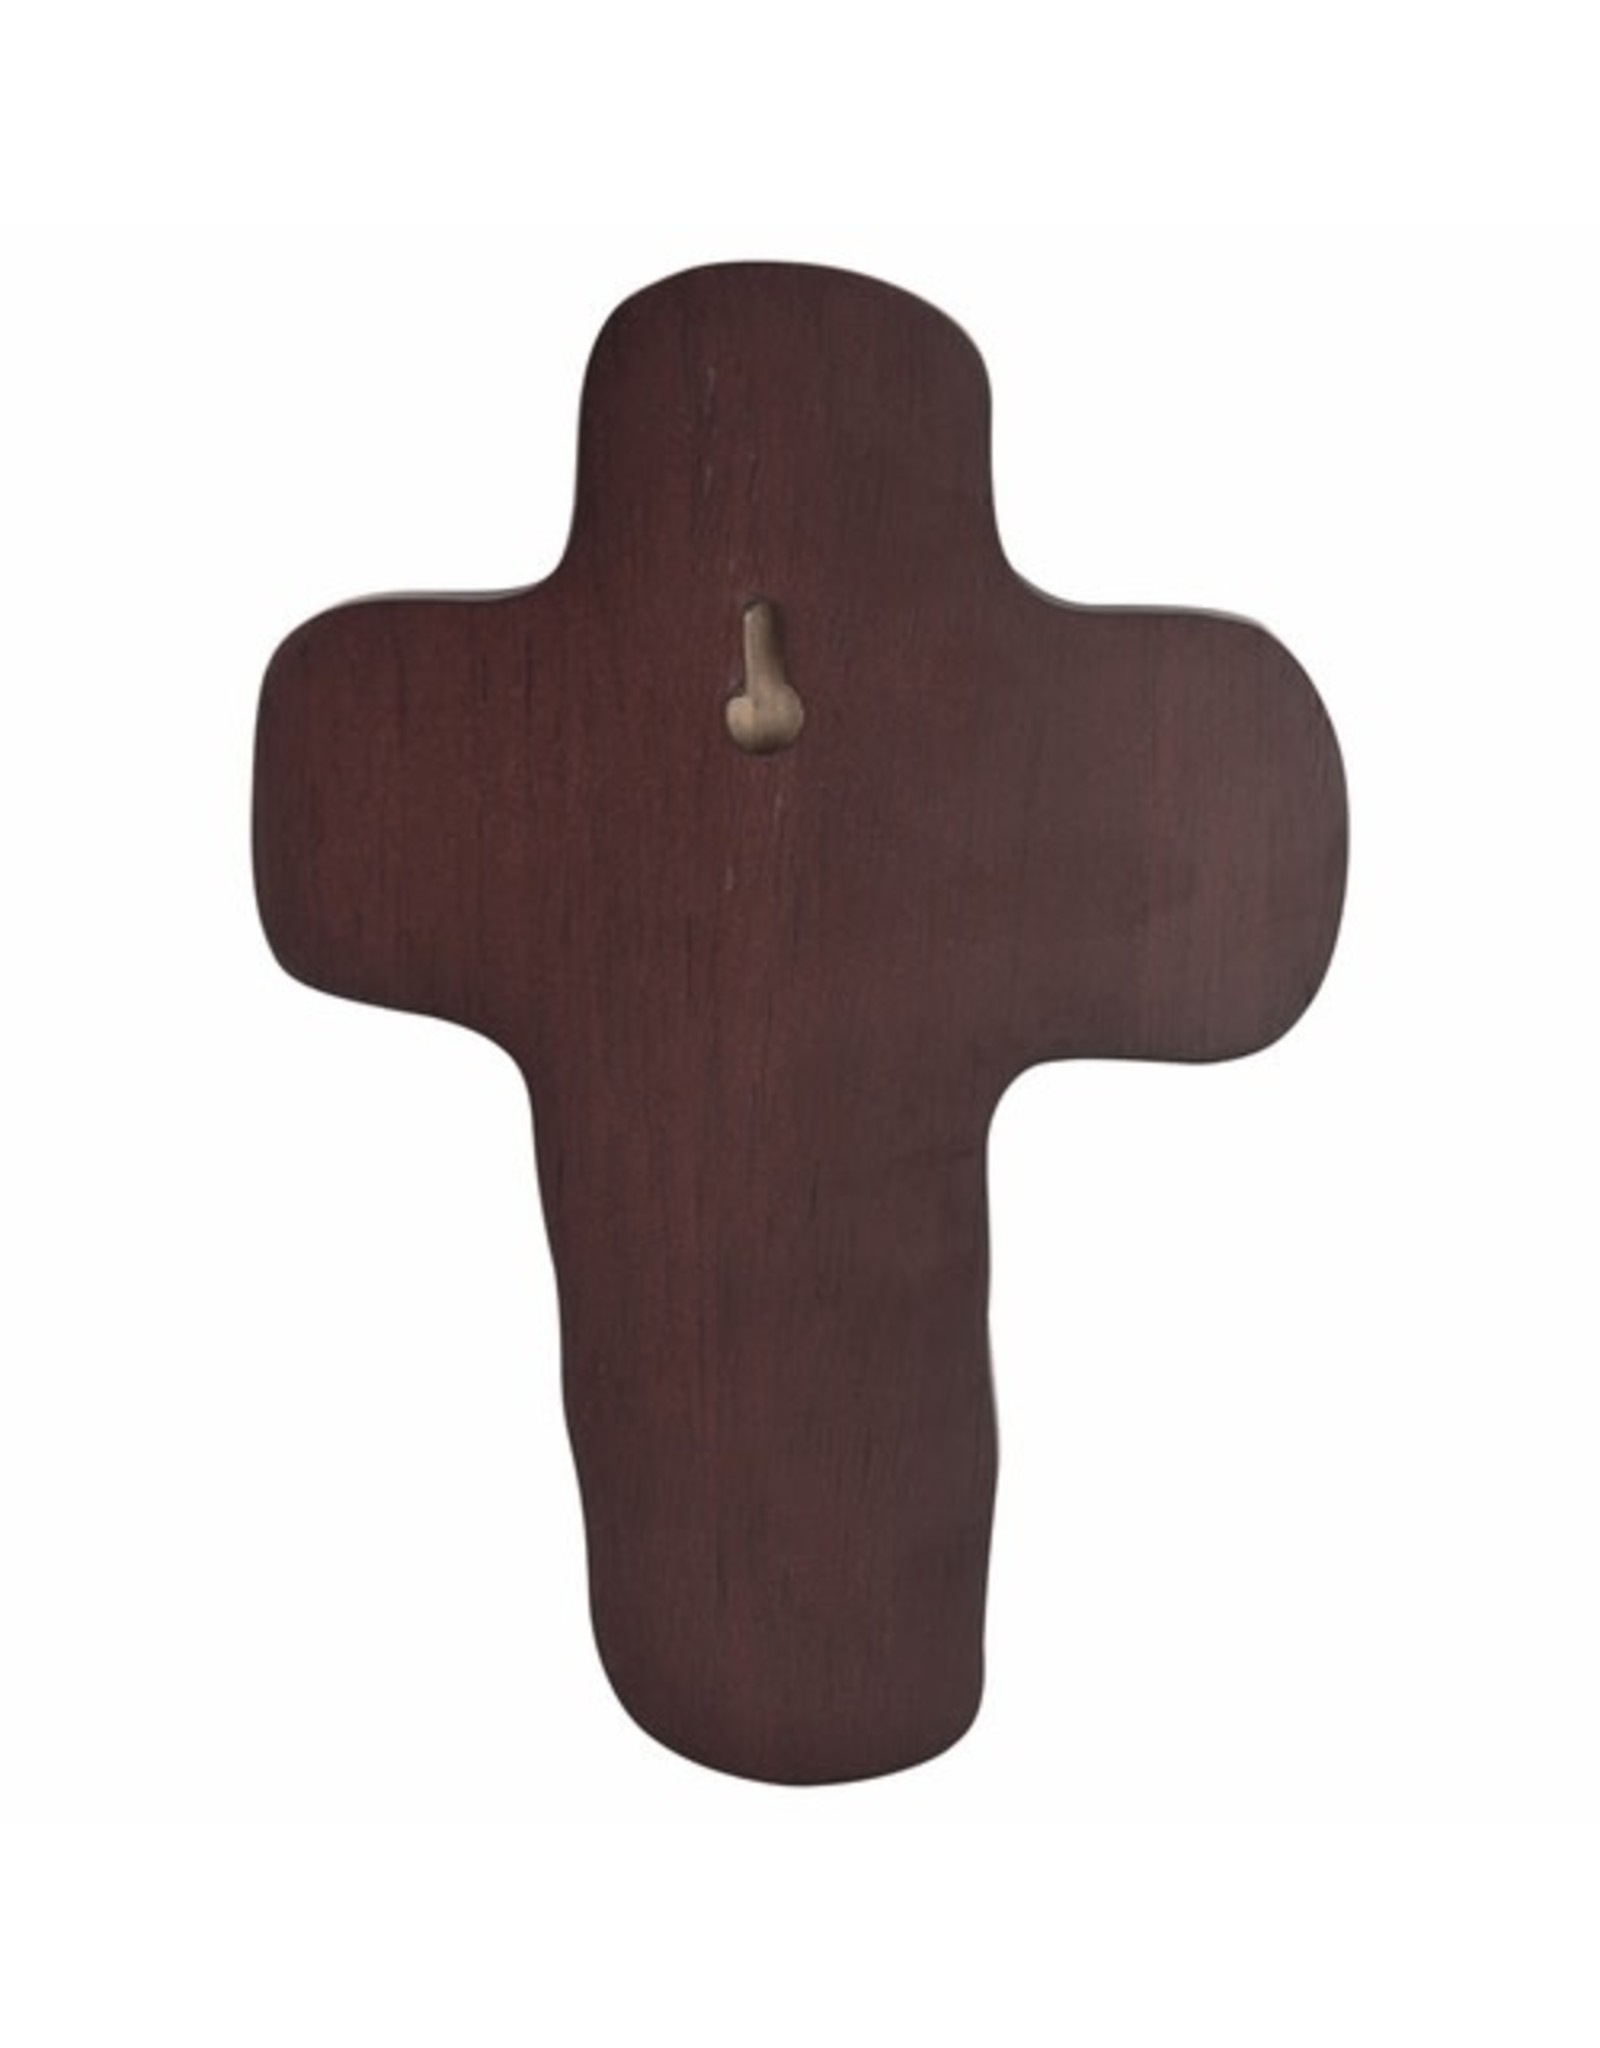 Singer 5-3/4" Cherry Wood and Resin Holy Trinity Wall Crucifix